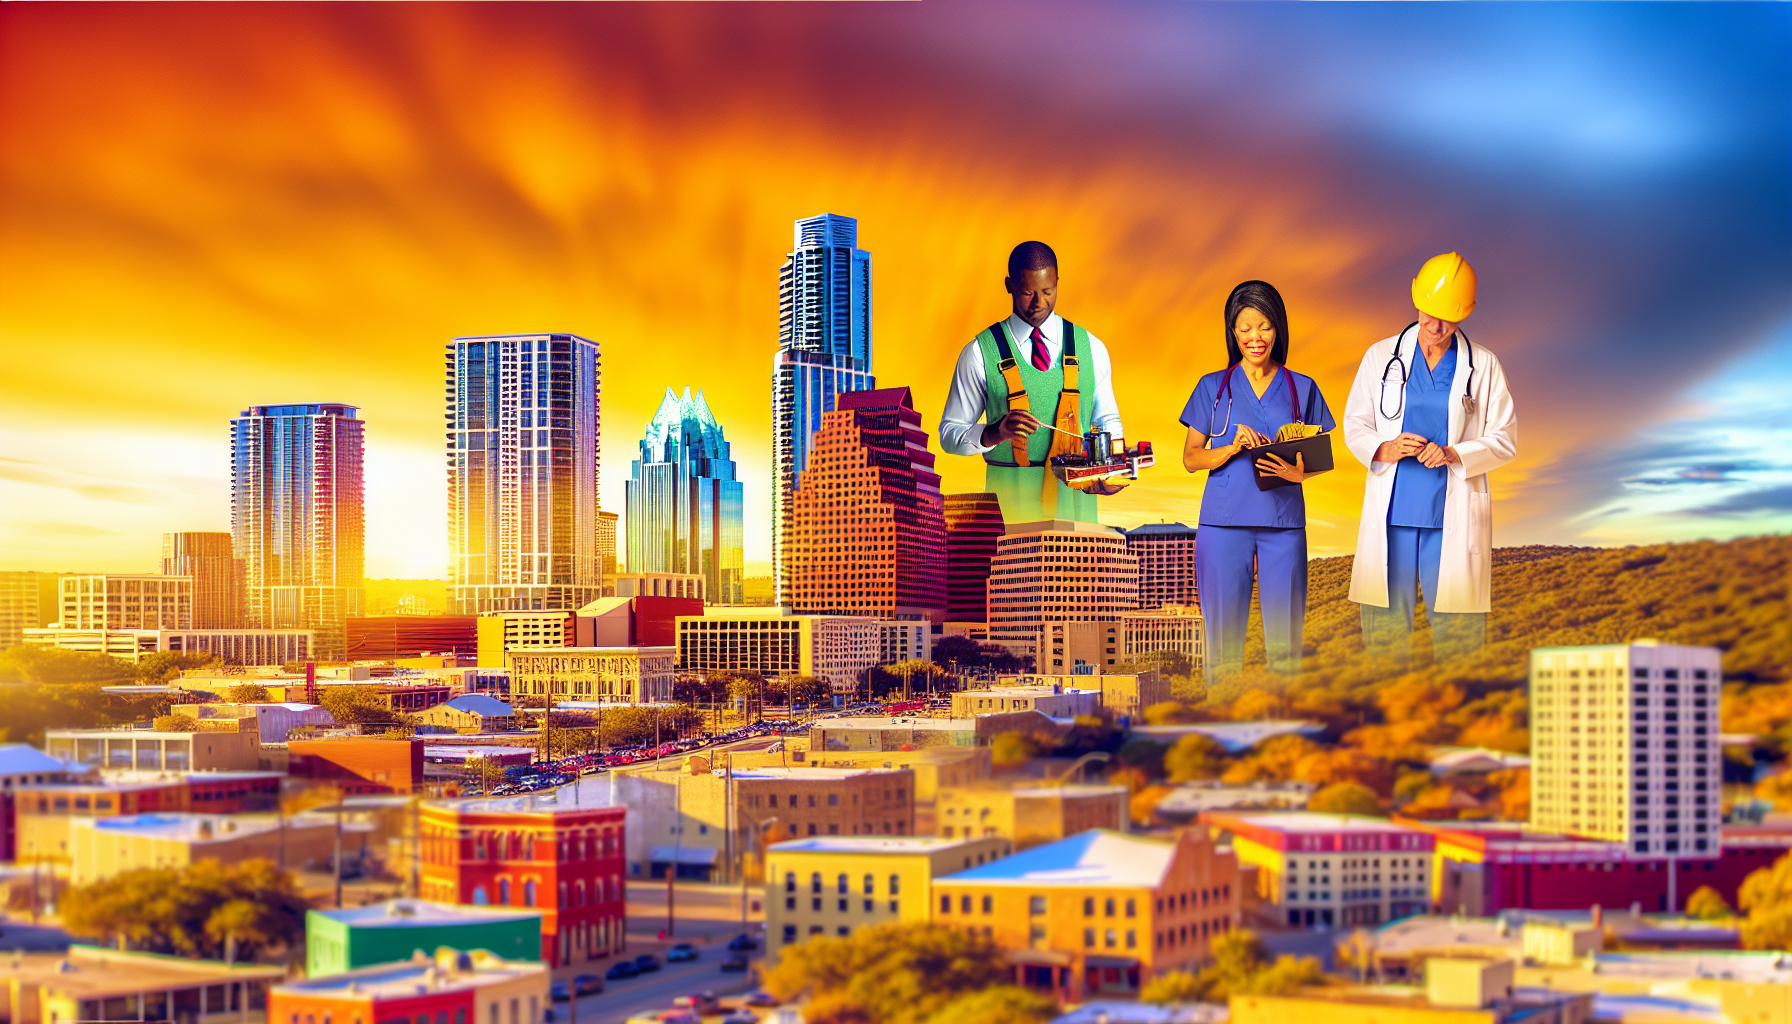 Busy cityscape in Texas with thriving economy and employment opportunities